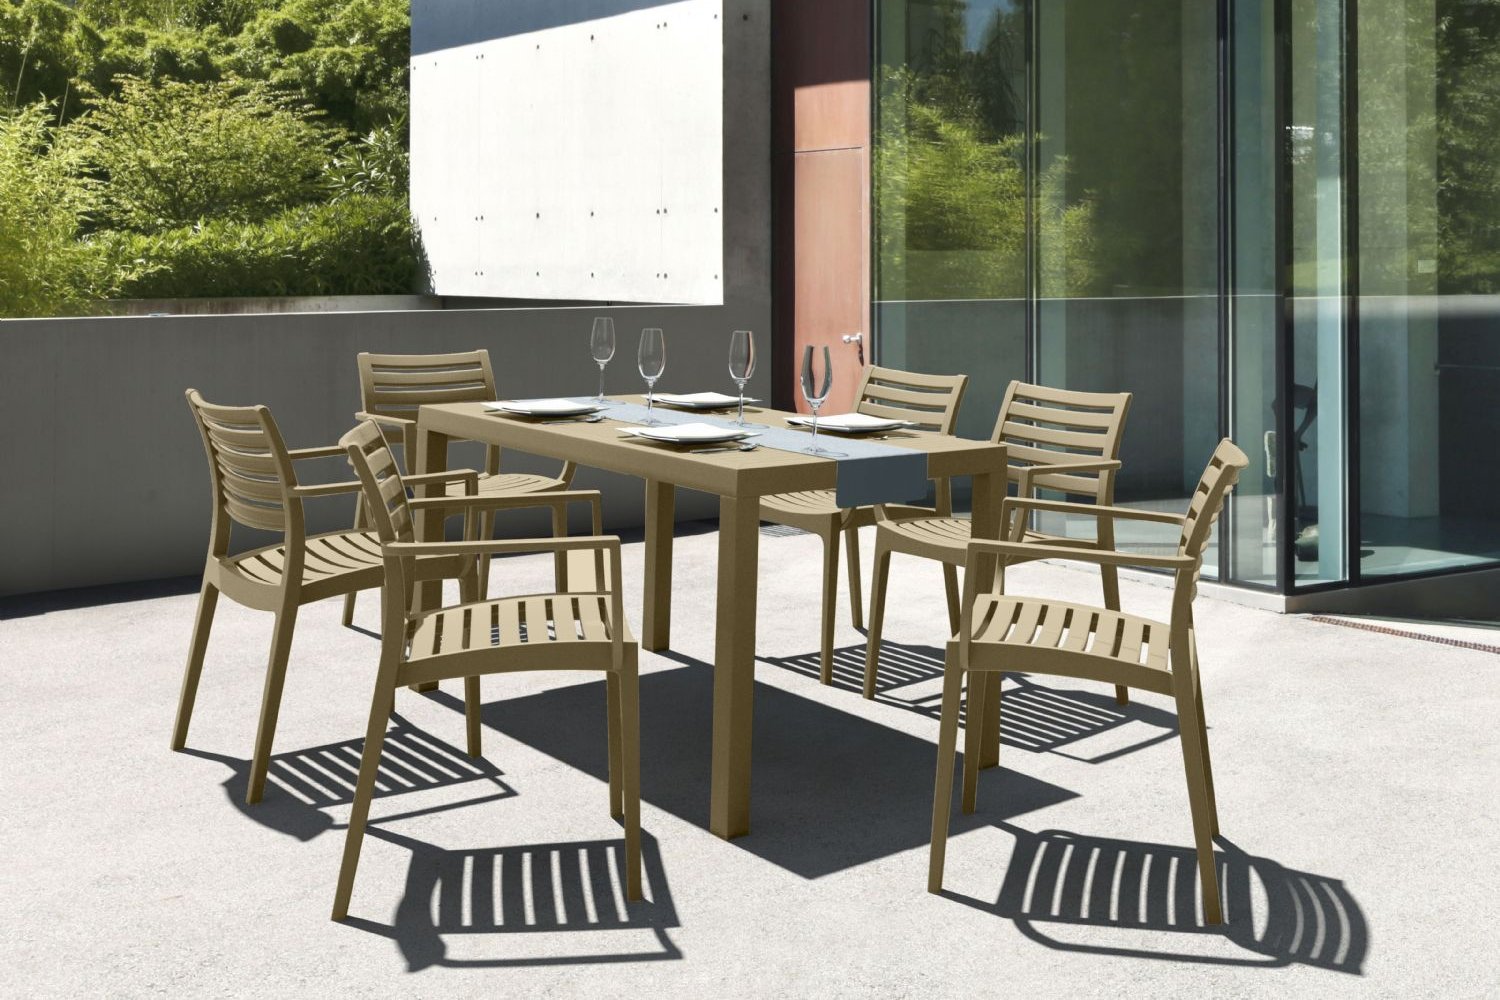 Artemis Resin Rectangle Outdoor Dining Set 7 Piece with Arm Chairs Dark Gray ISP1862S-DGR - 6